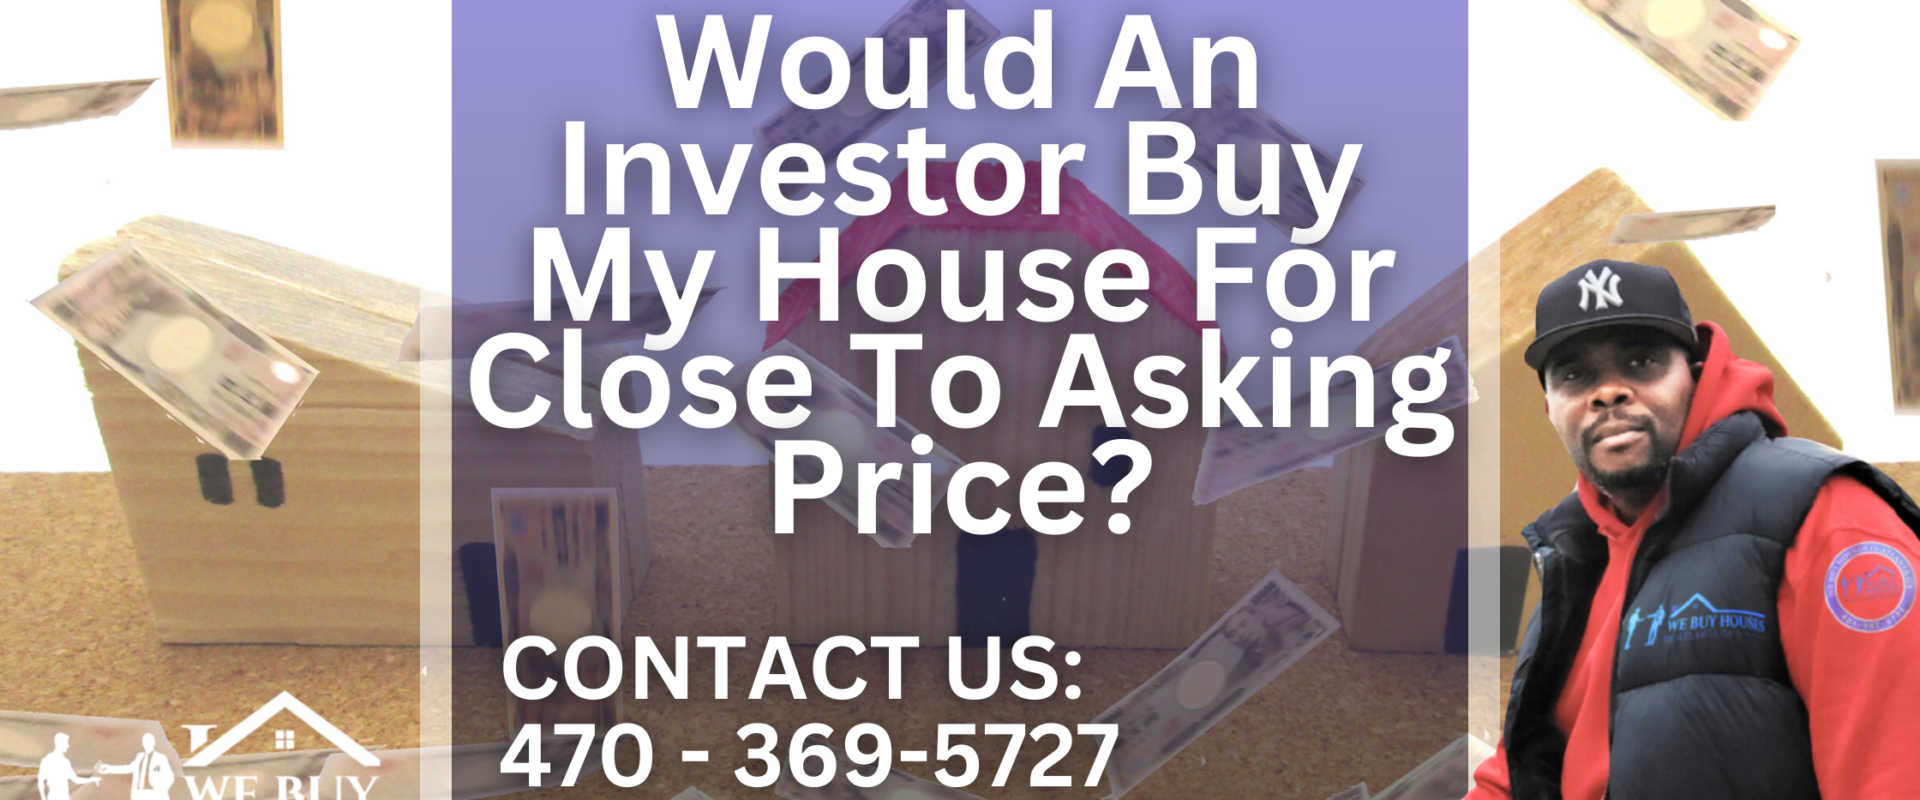 Would An Investor Buy My House For Close To Asking Price